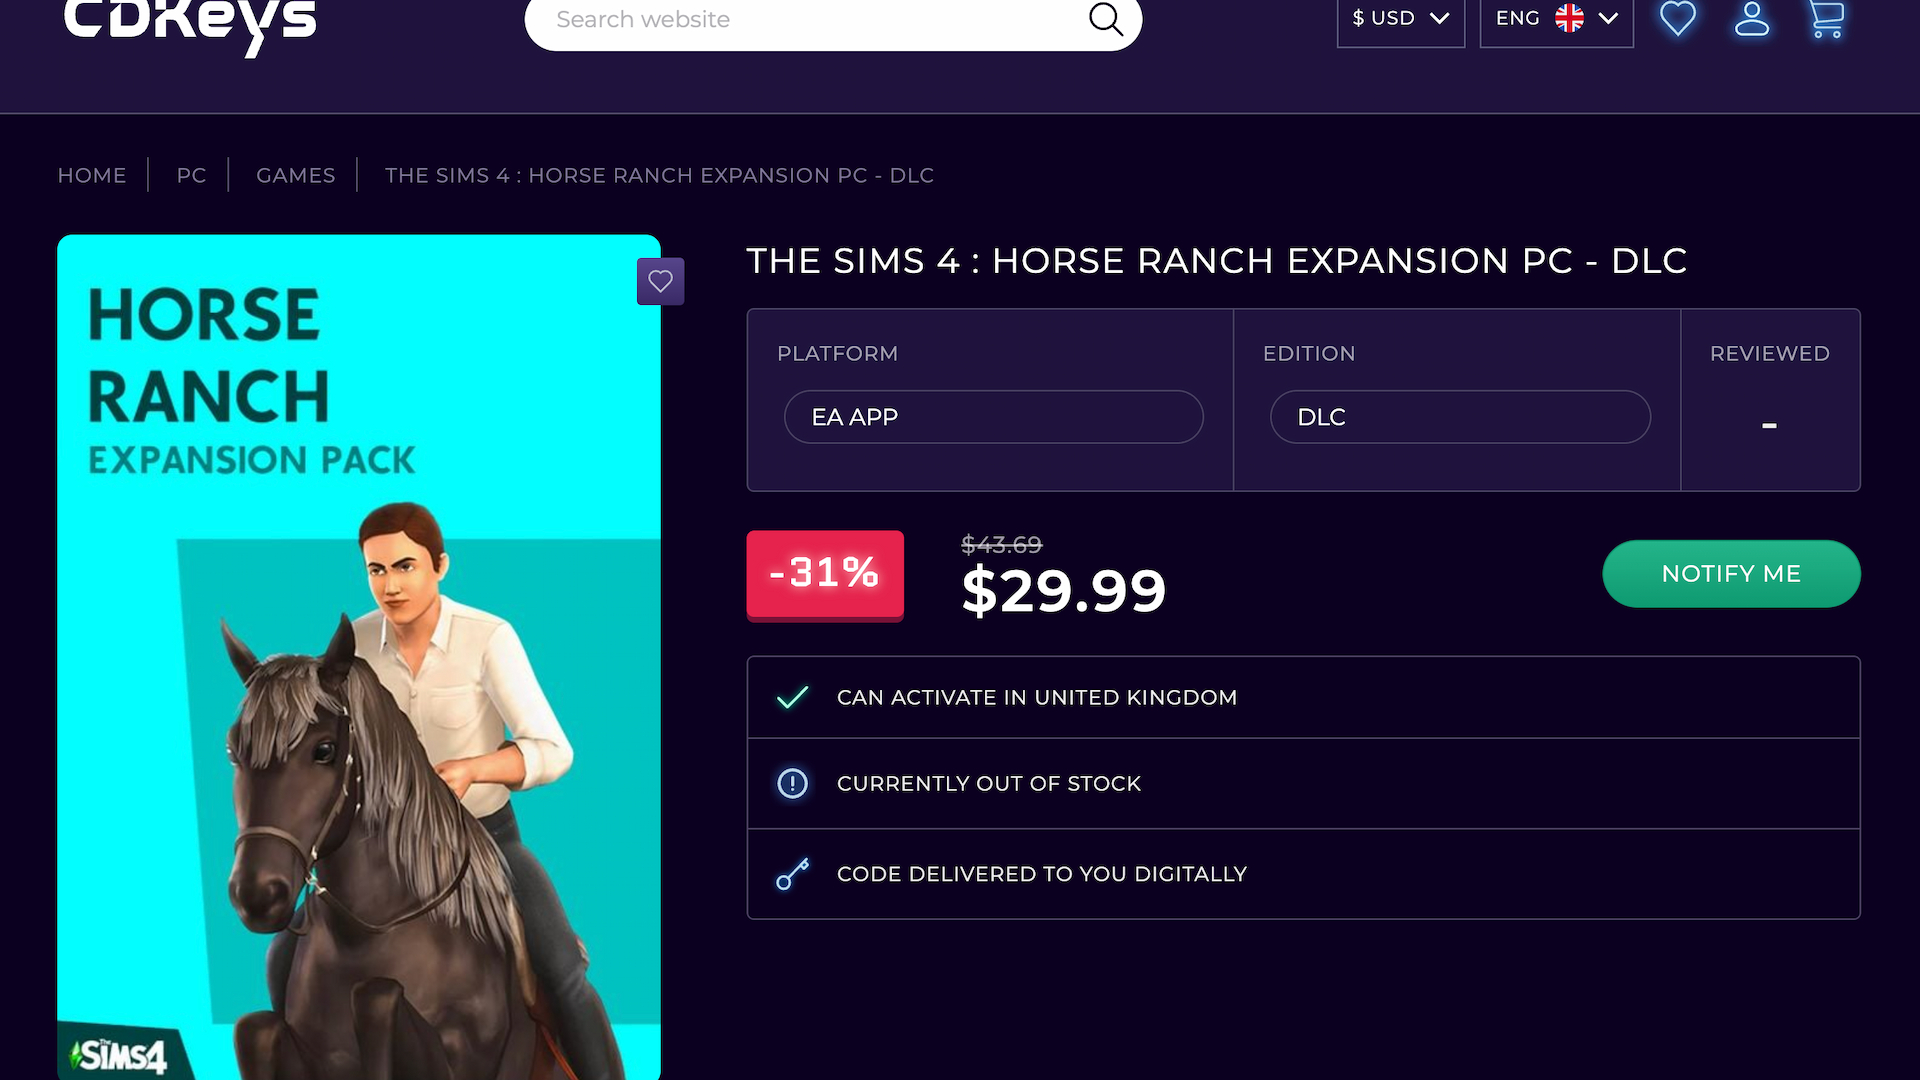 A screenshot from the CDKeys website showing the sale of a Sims 4 horse expansion